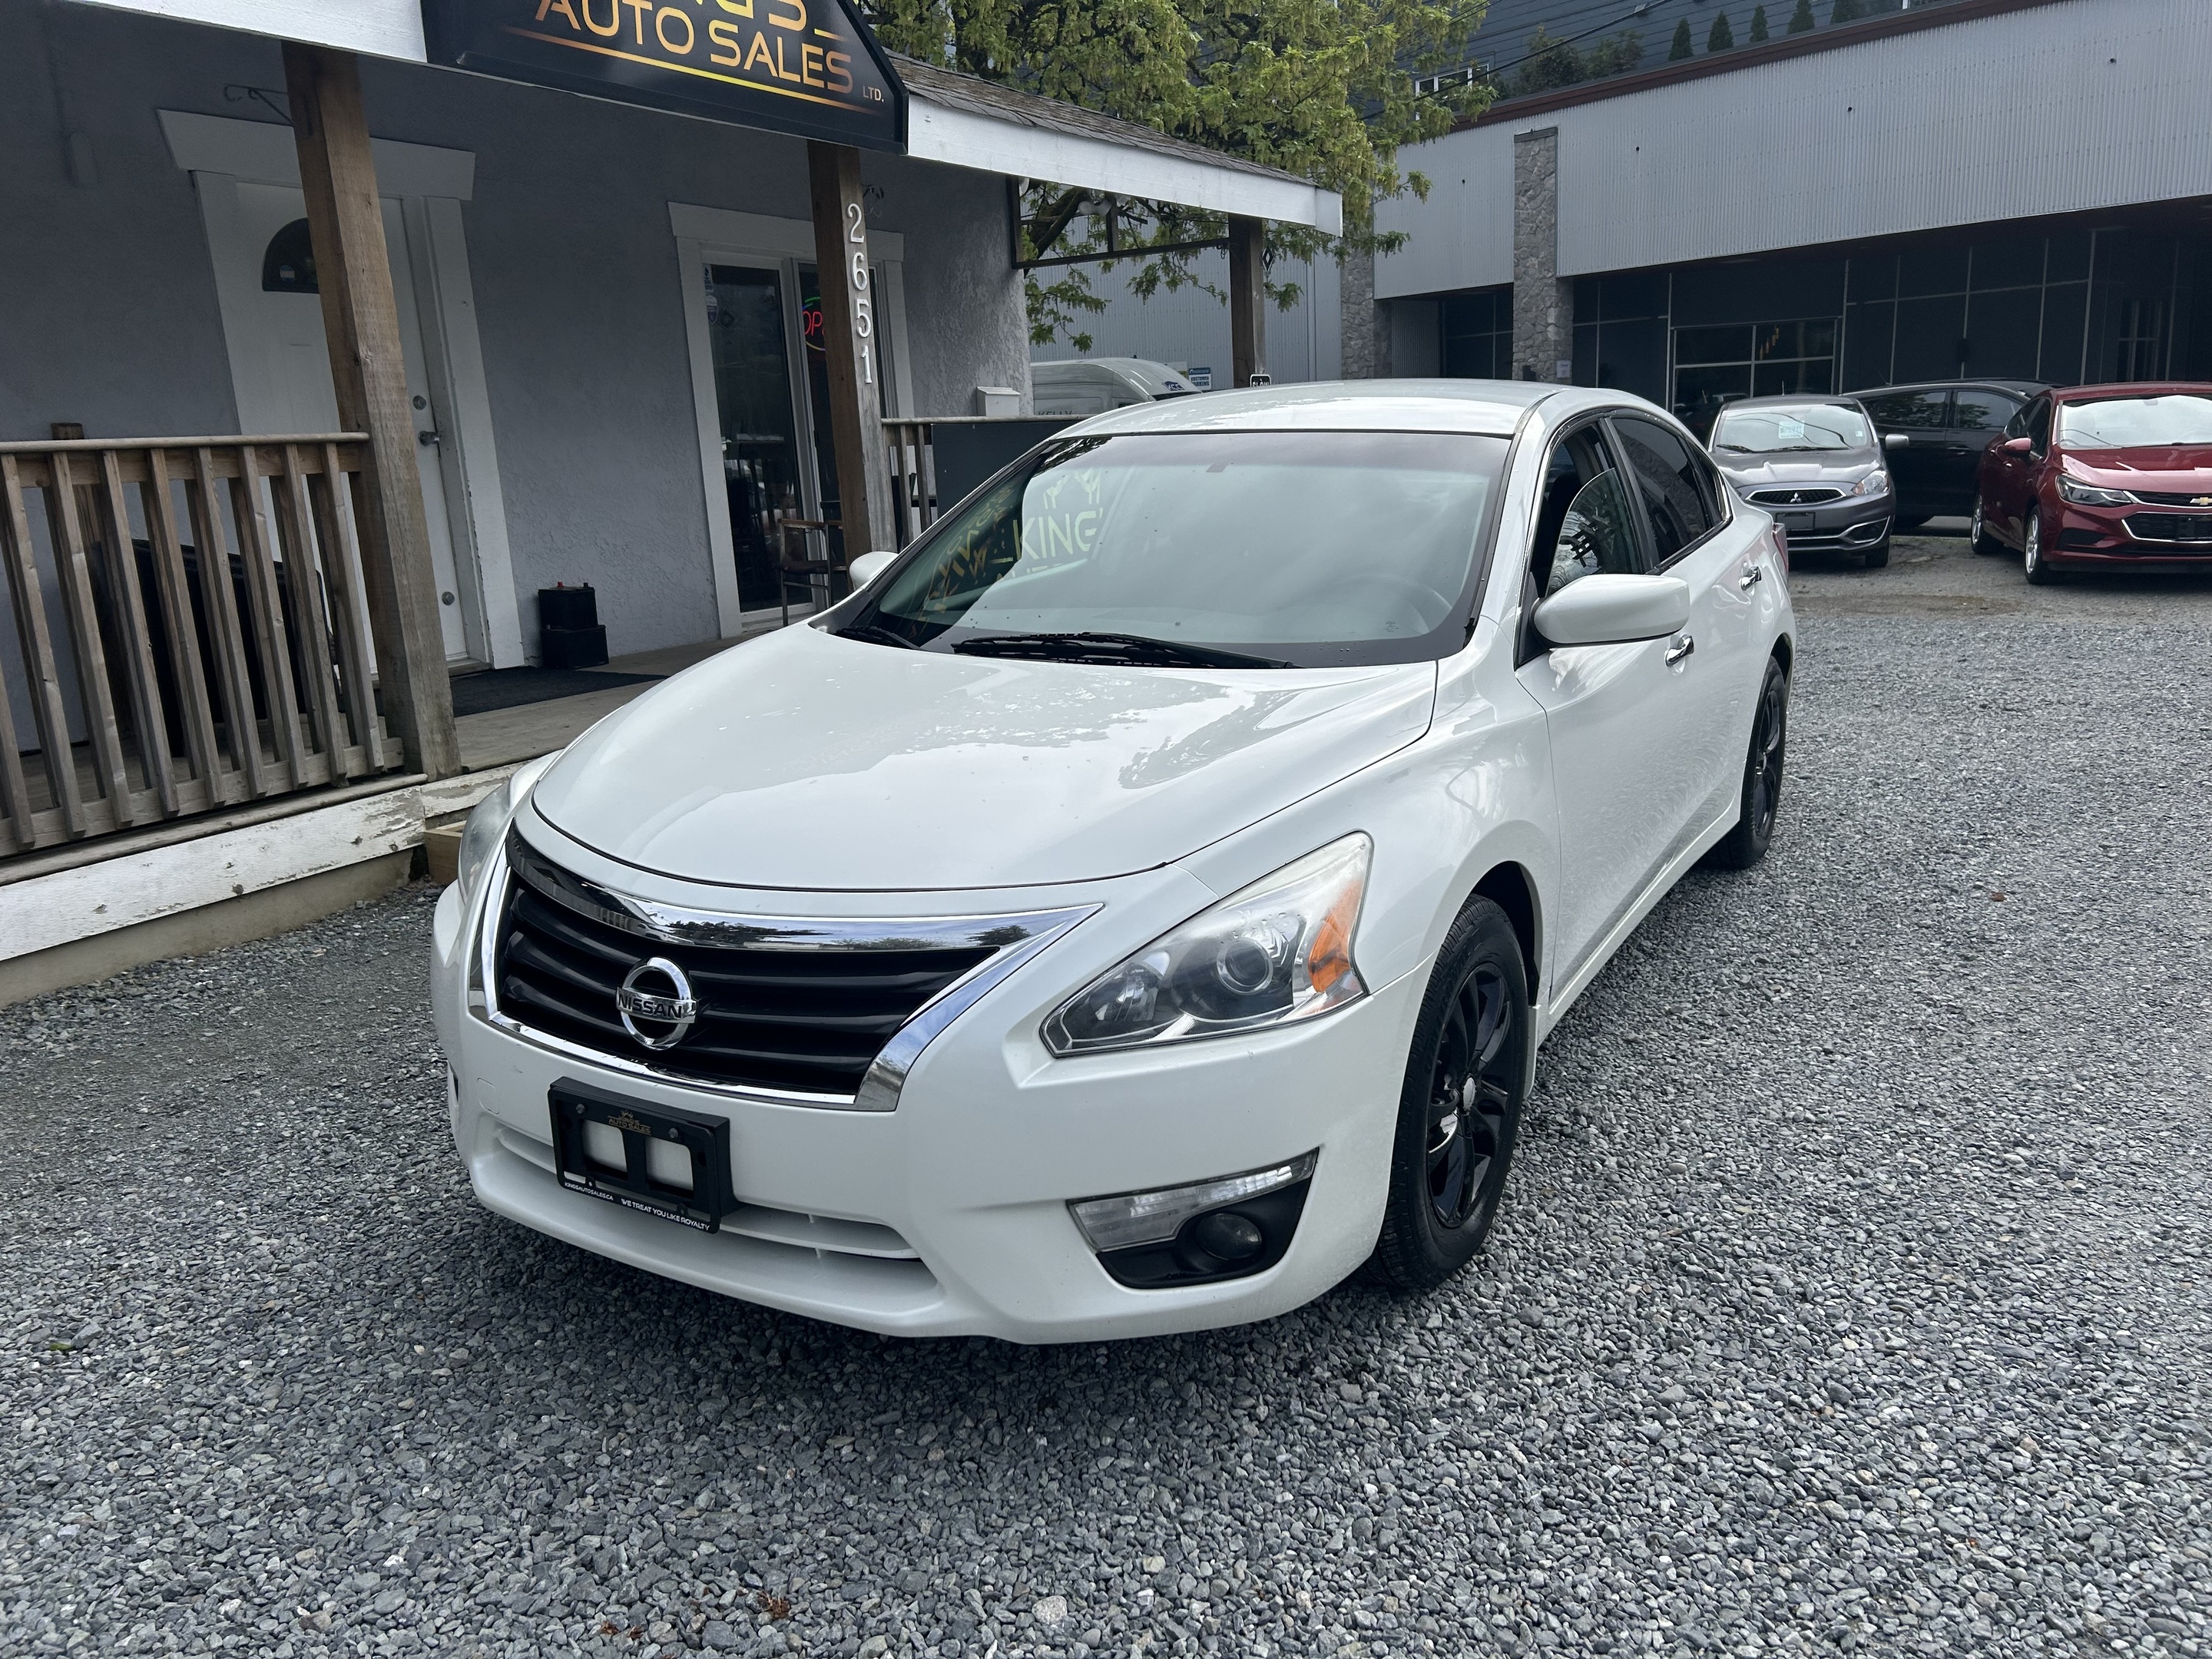 2013 Nissan Altima 4dr Sdn I4 CVT 2.5 SV No accidents well serviced